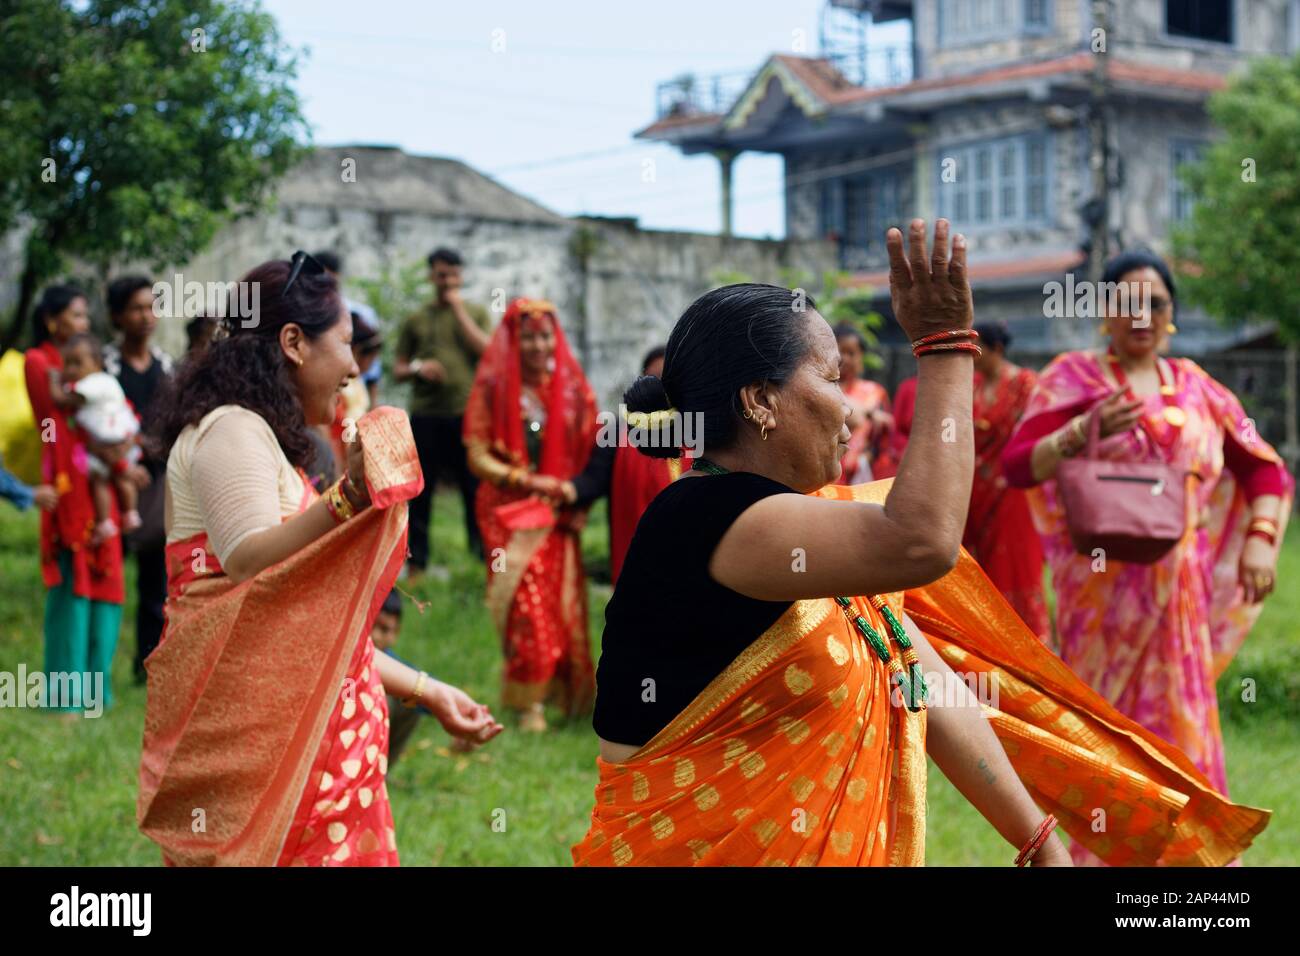 A Nepali Woman Dancing at a Marriage Ceremony Stock Photo